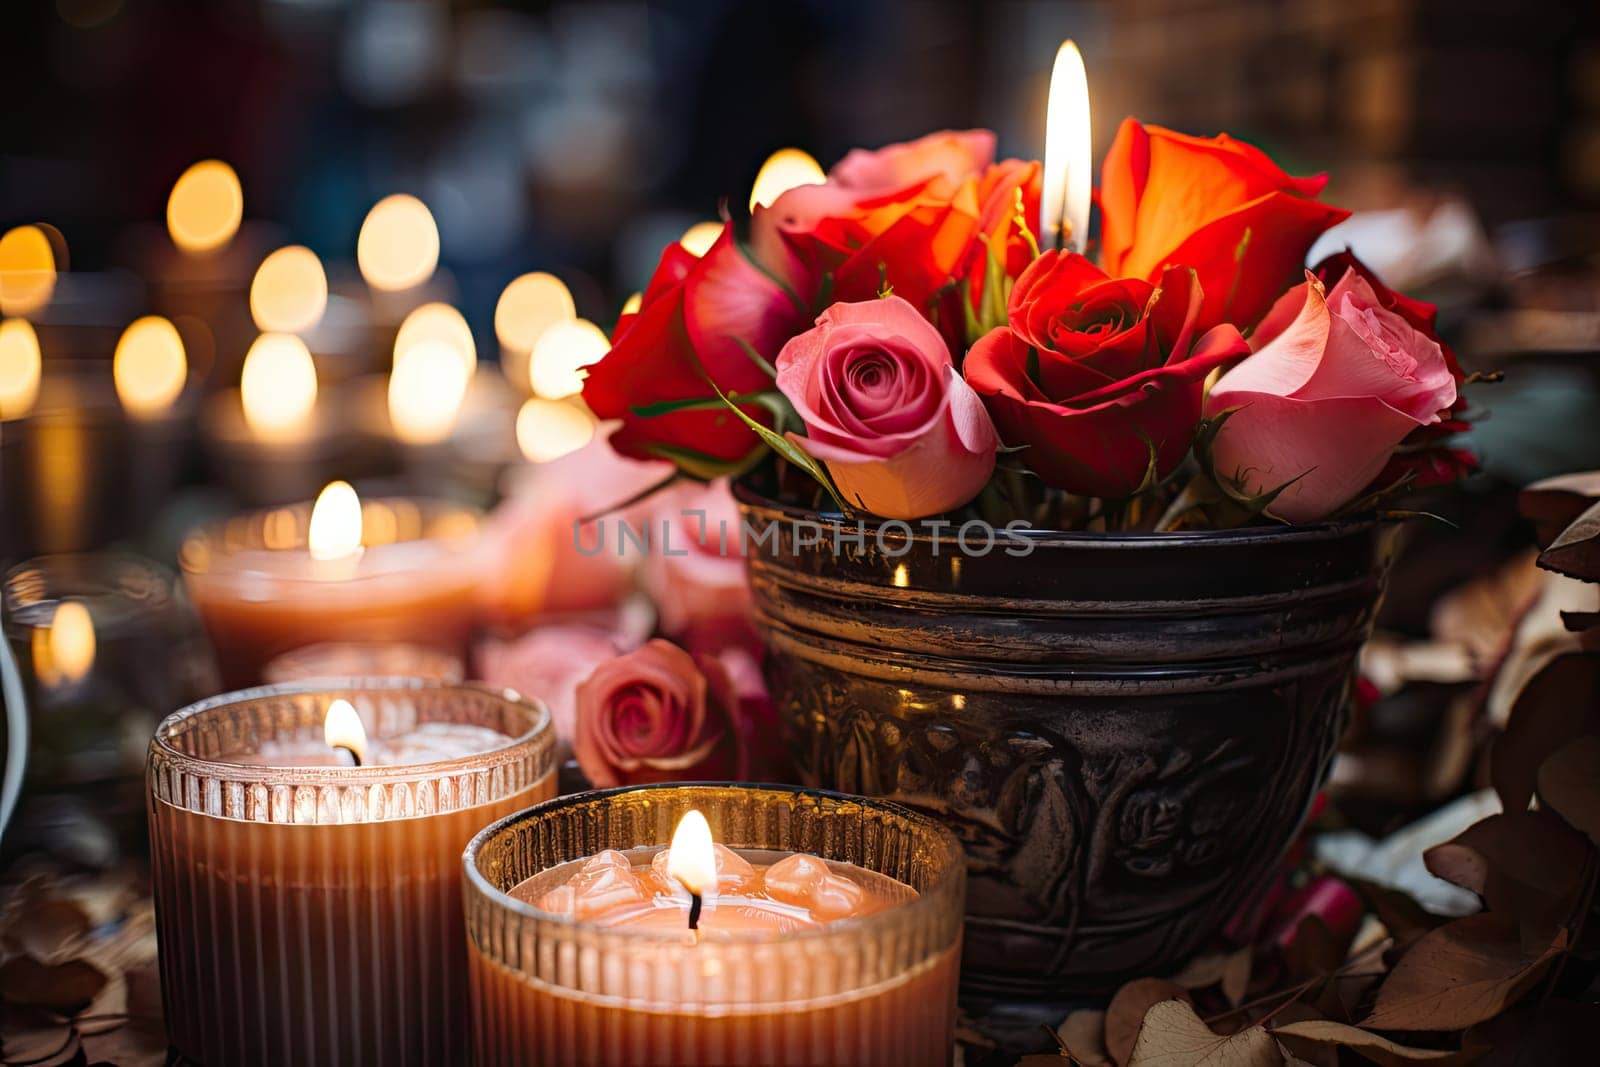 candles and flowers on a table with some roses in the vases next to each other lit candles are also visible